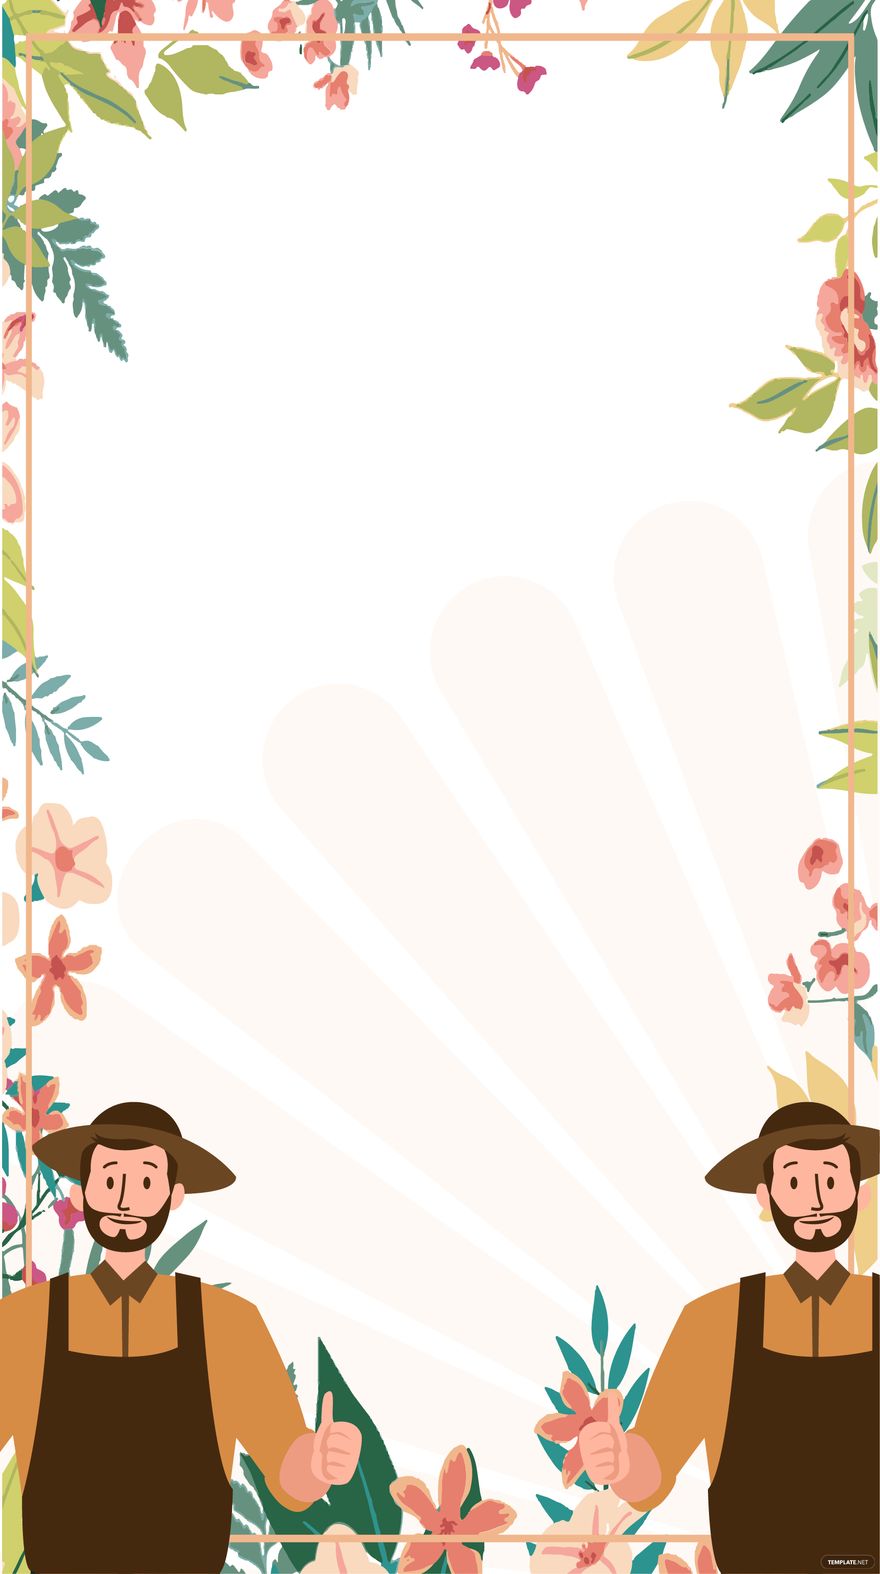 Free Farmers Day iPhone Background in PDF, Illustrator, PSD, EPS, SVG, JPG, PNG